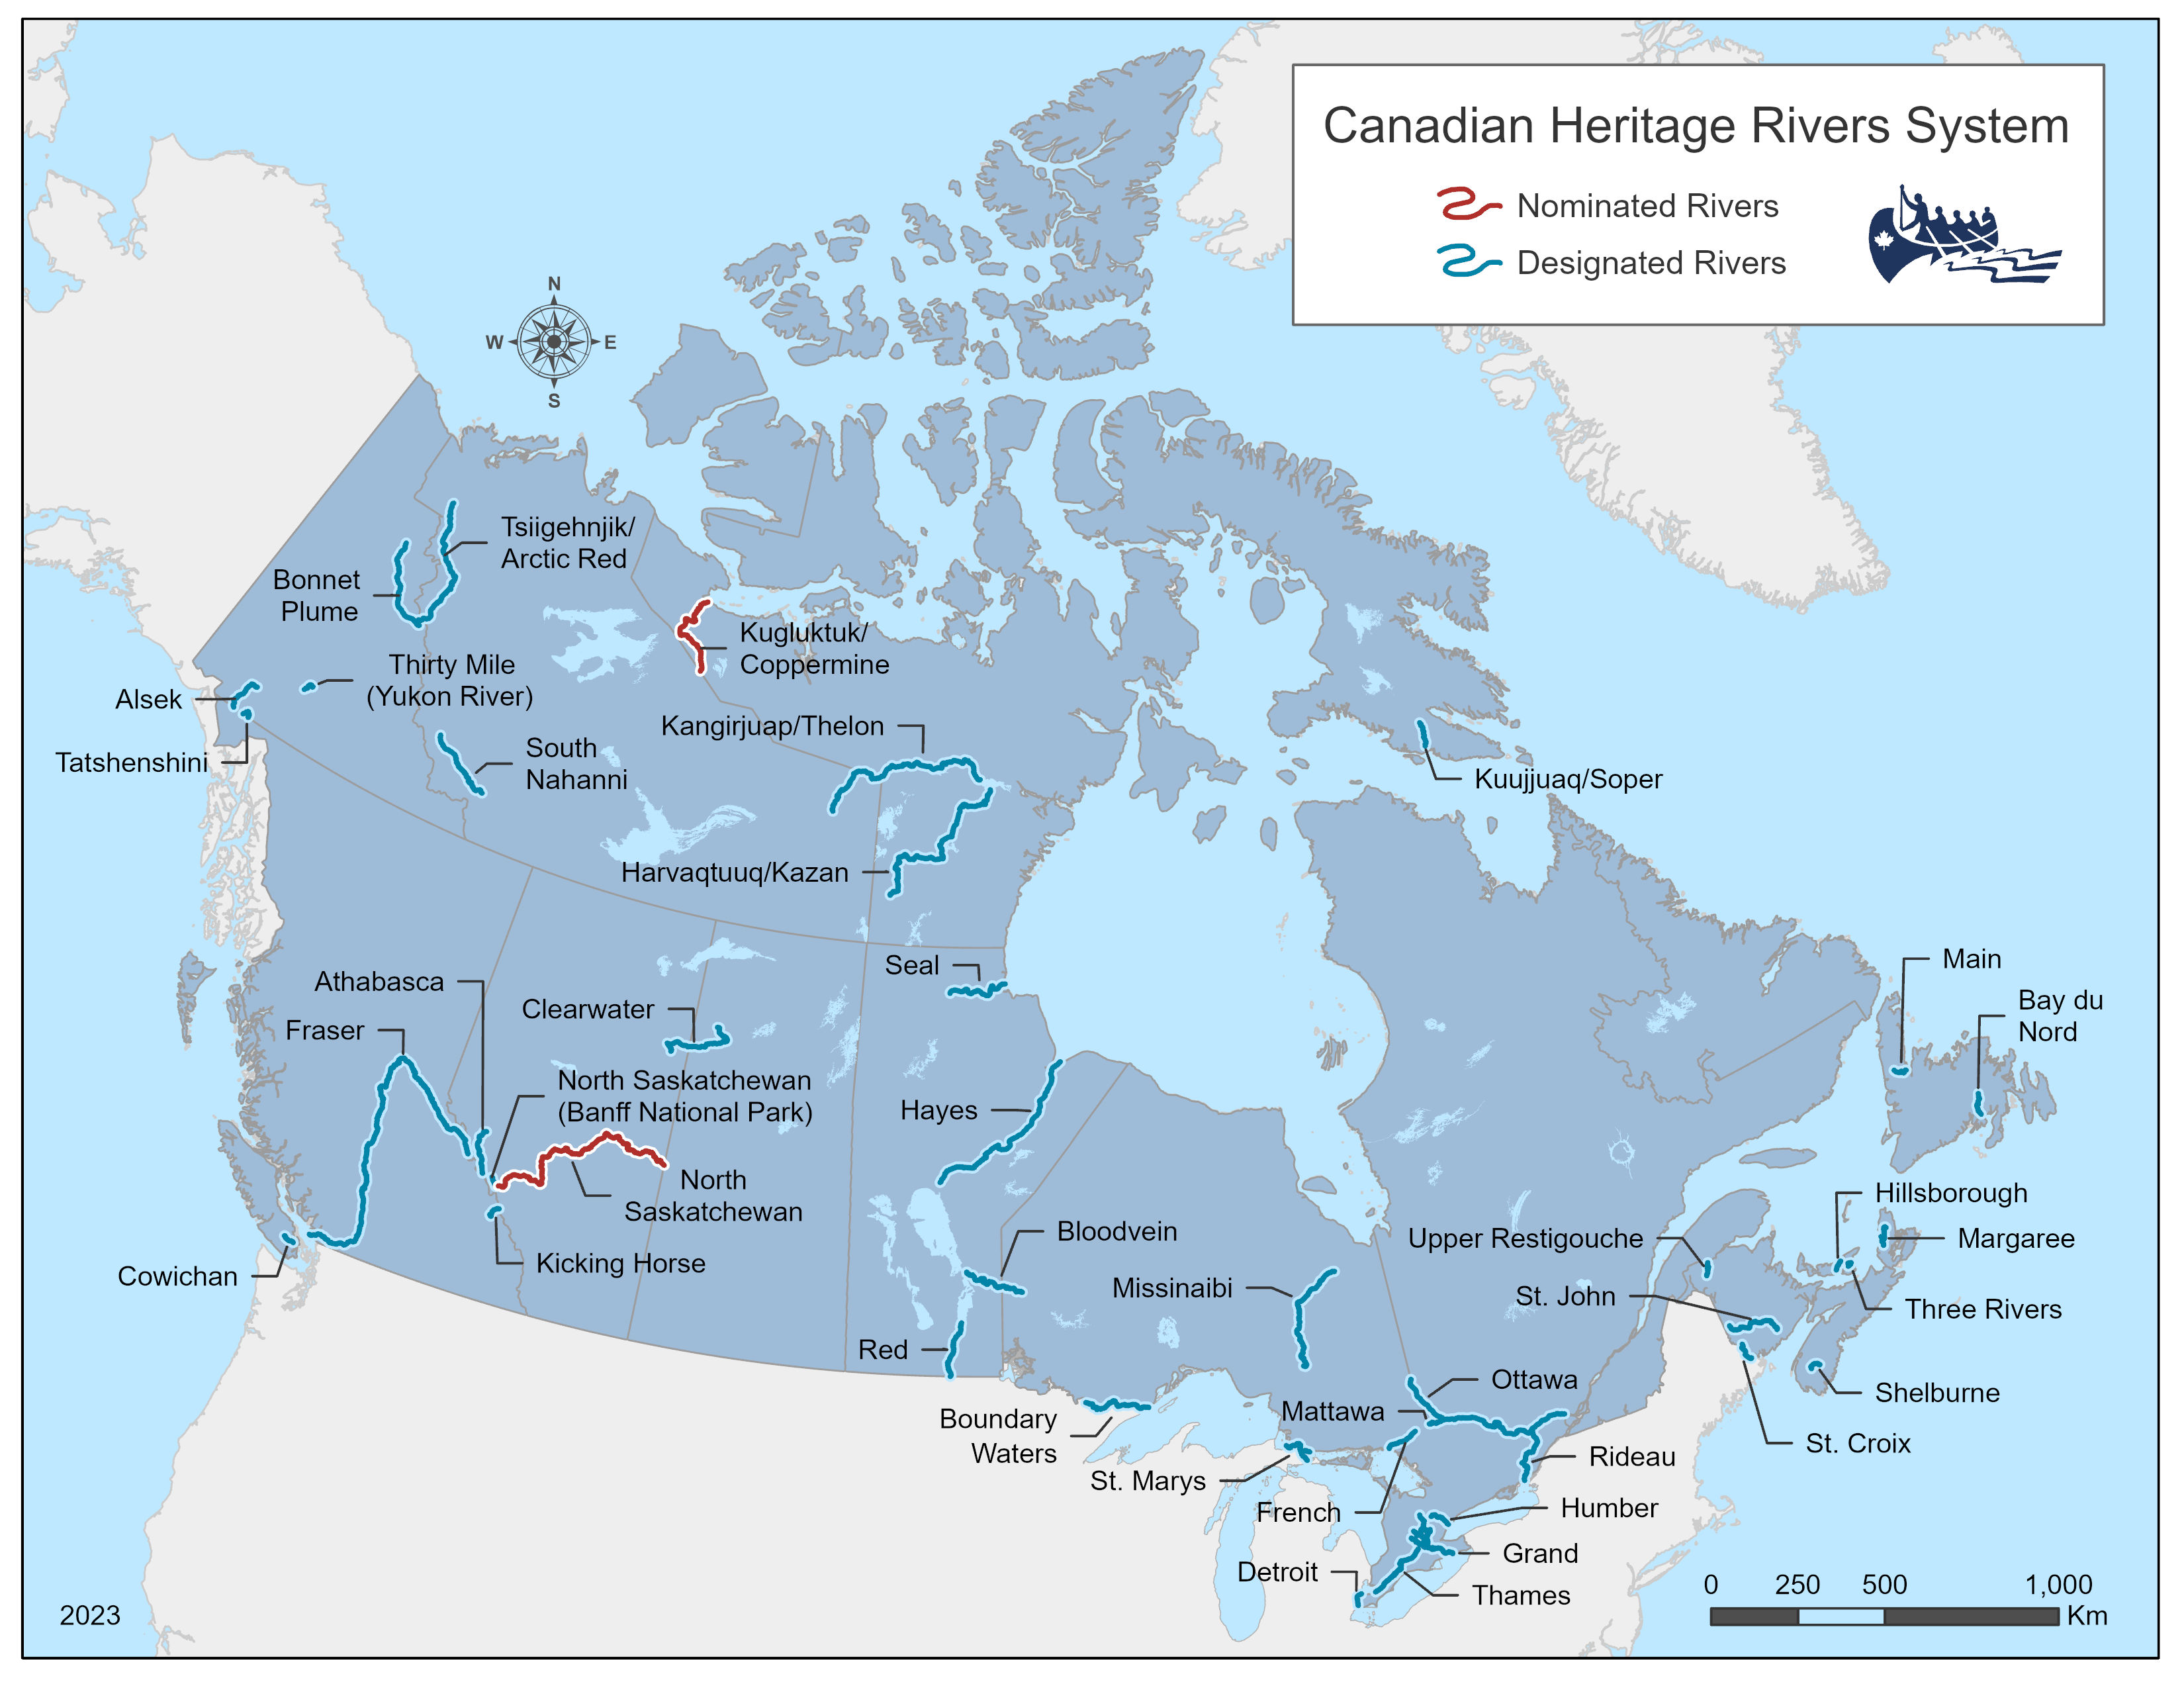 Map of Canada with red lines indicating nominated rivers and blue lines indicating designated rivers